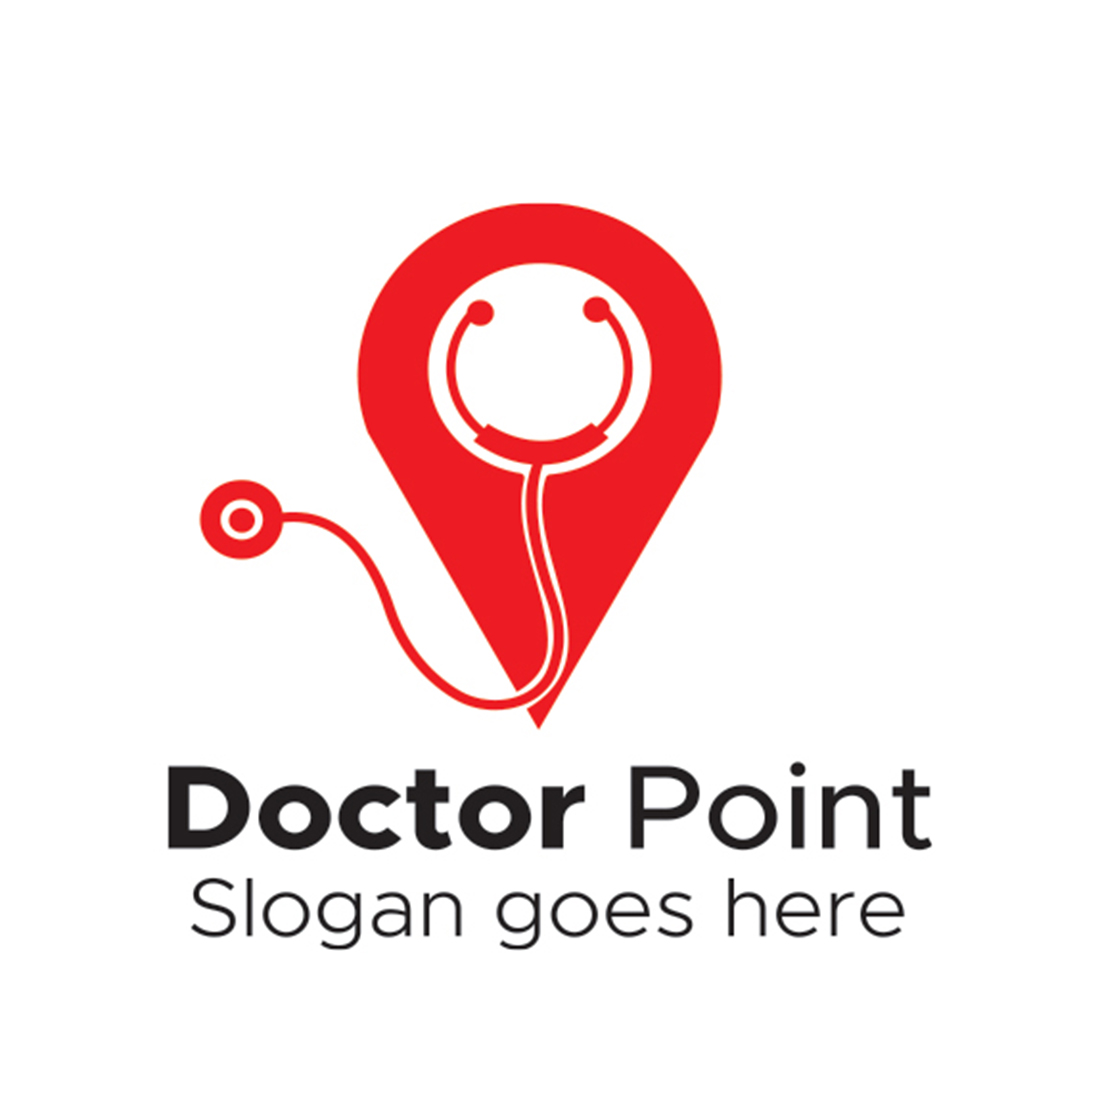 DOCTOR POINT LOGO DESIGN TEMPLATE preview image.